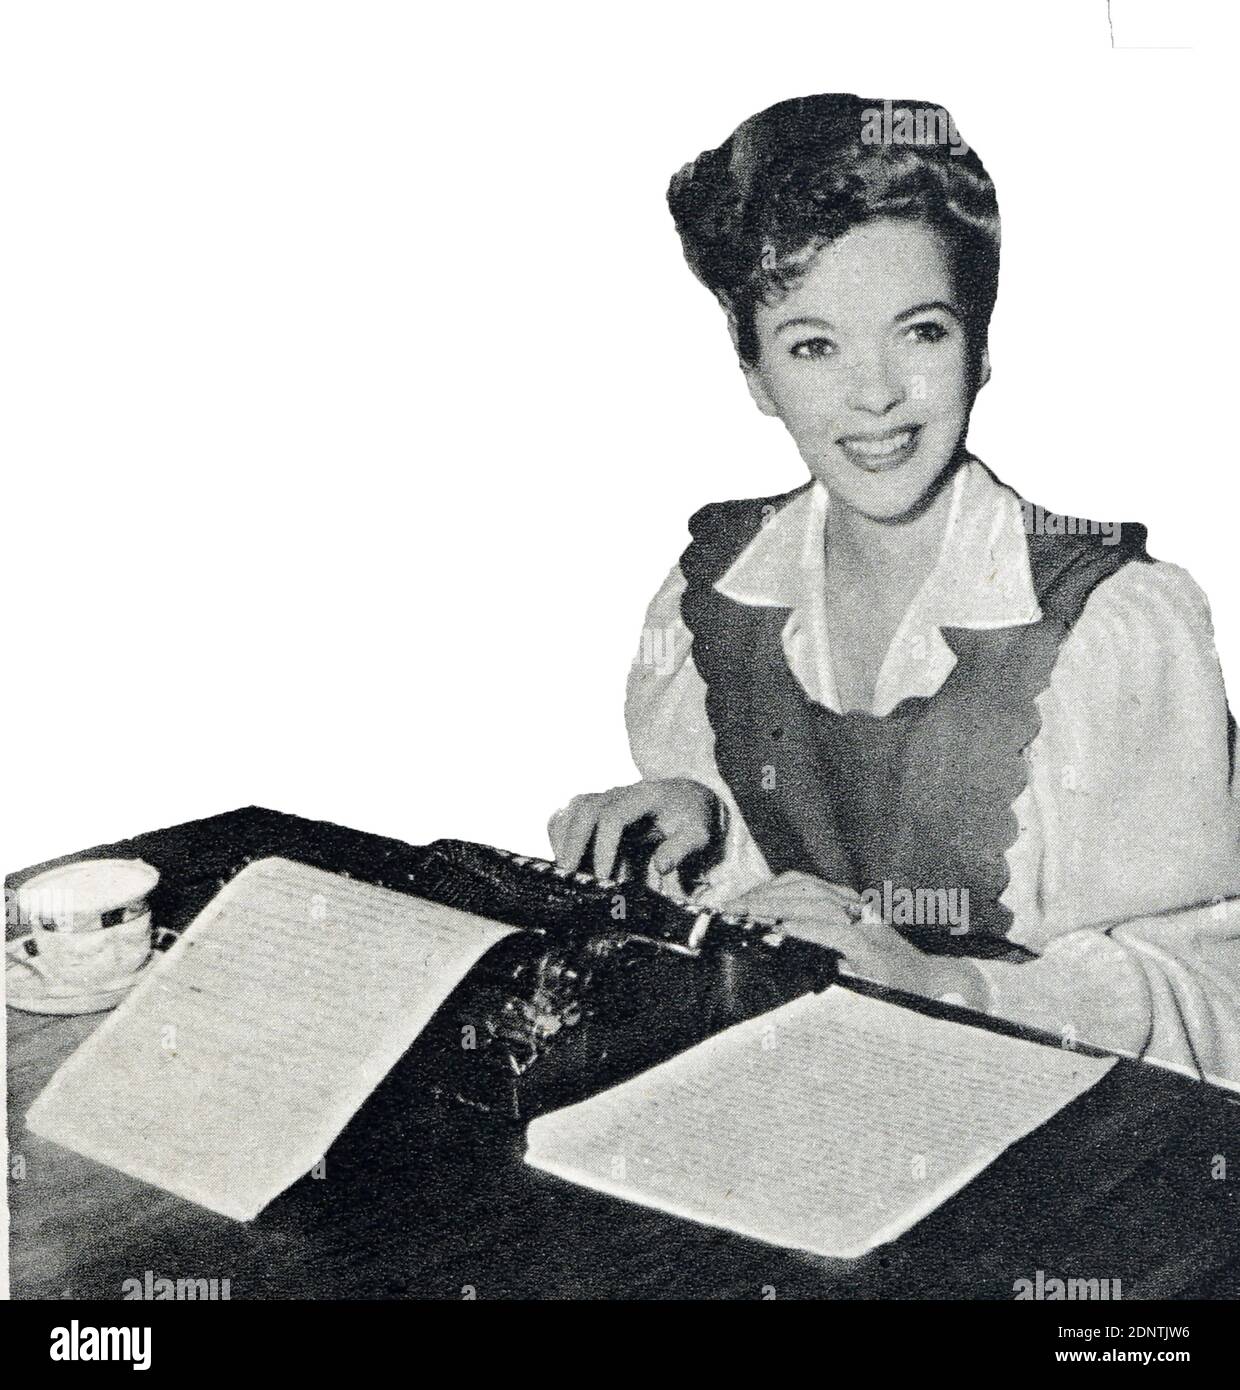 Photograph of Ida Lupino (1918-1995) an English-American actress, singer, director, and producer. Stock Photo